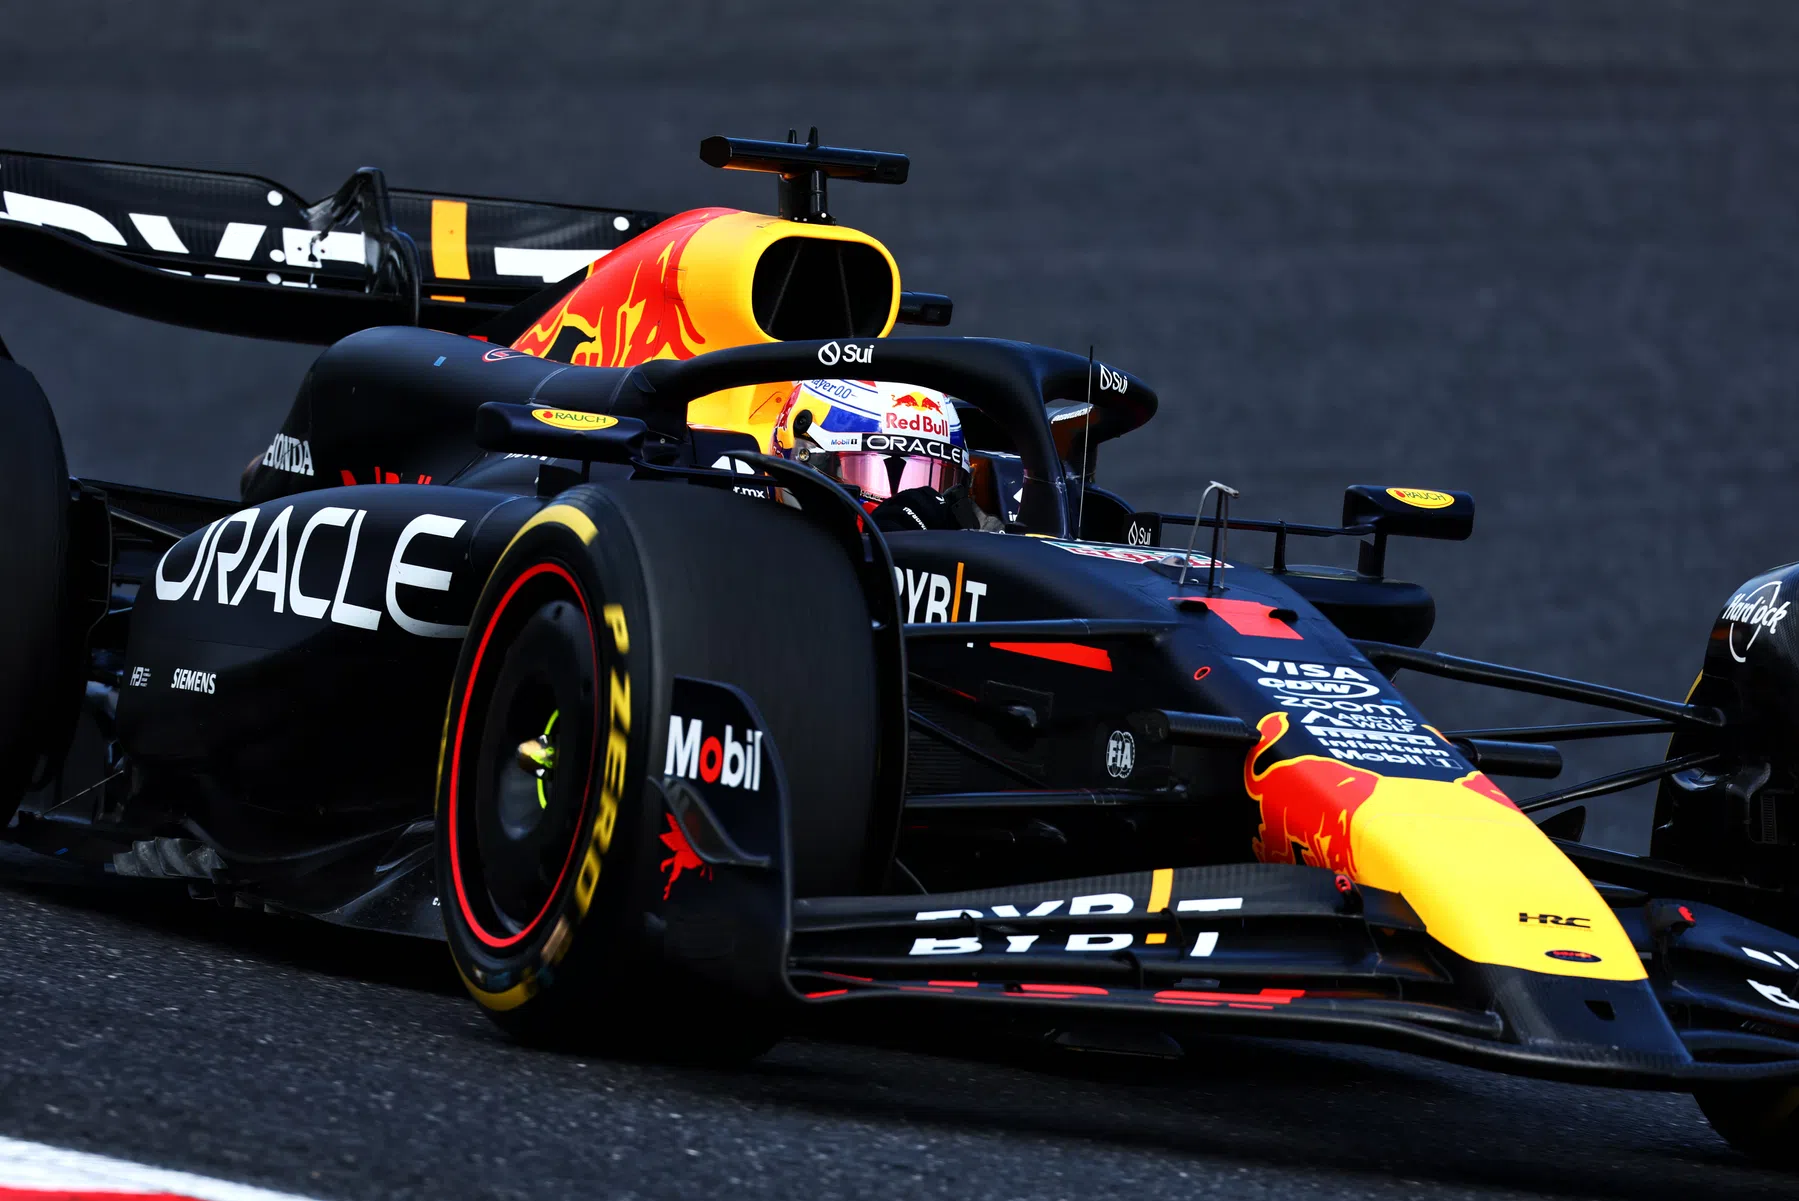 Analysis Red Bull Powertrains is Red Bull's and Verstappen's problem child